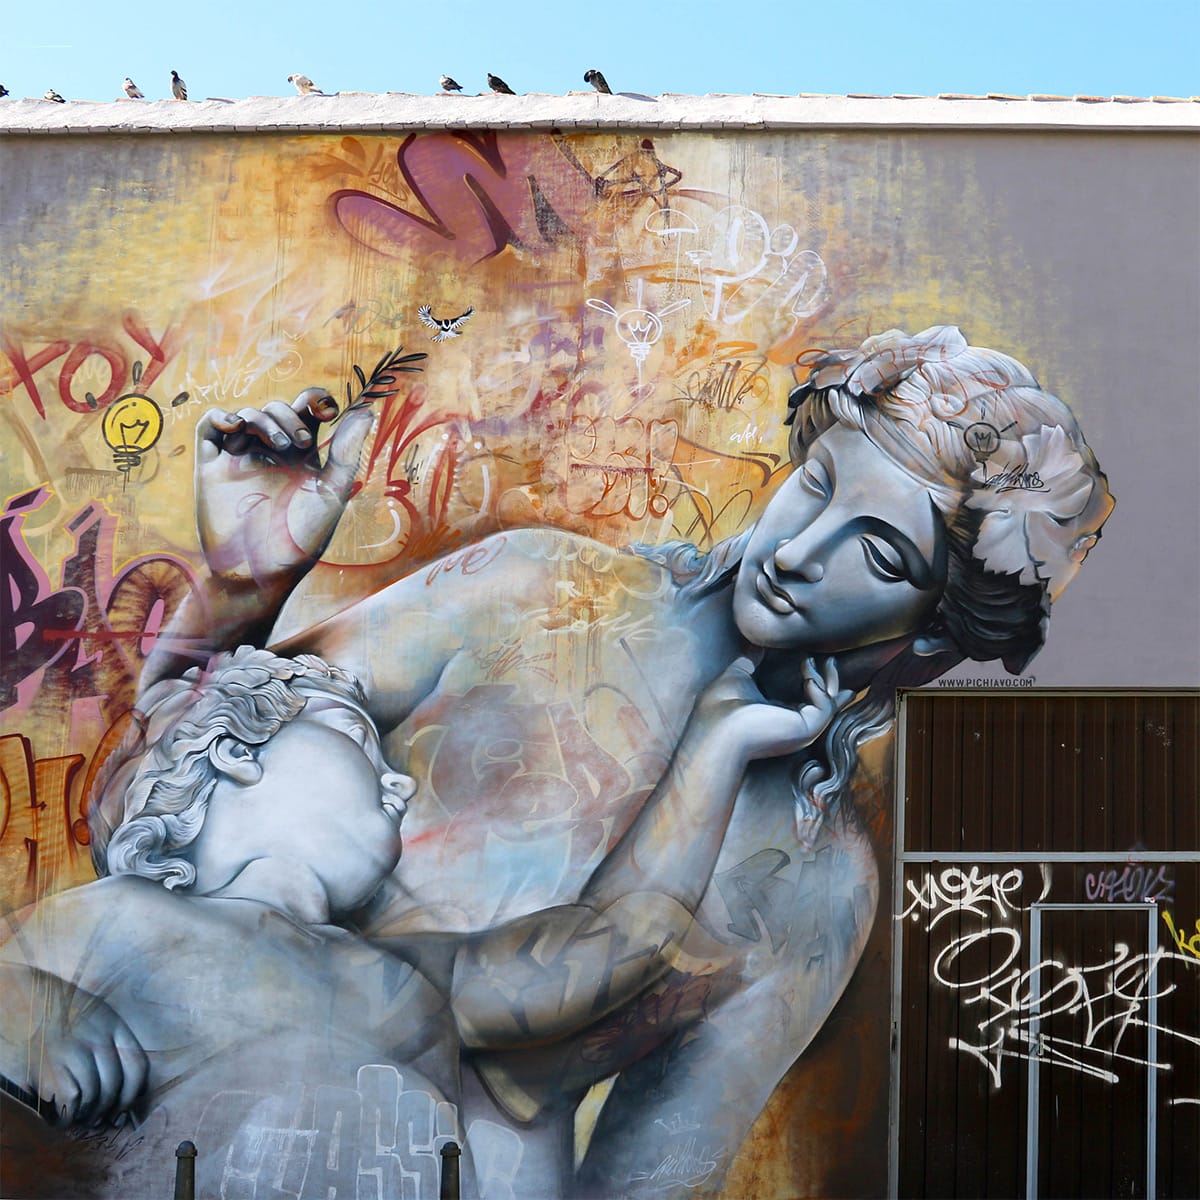 Impressive Monumental Murals That Blend Classical Figures And Graffiti By Pichiavo (8)